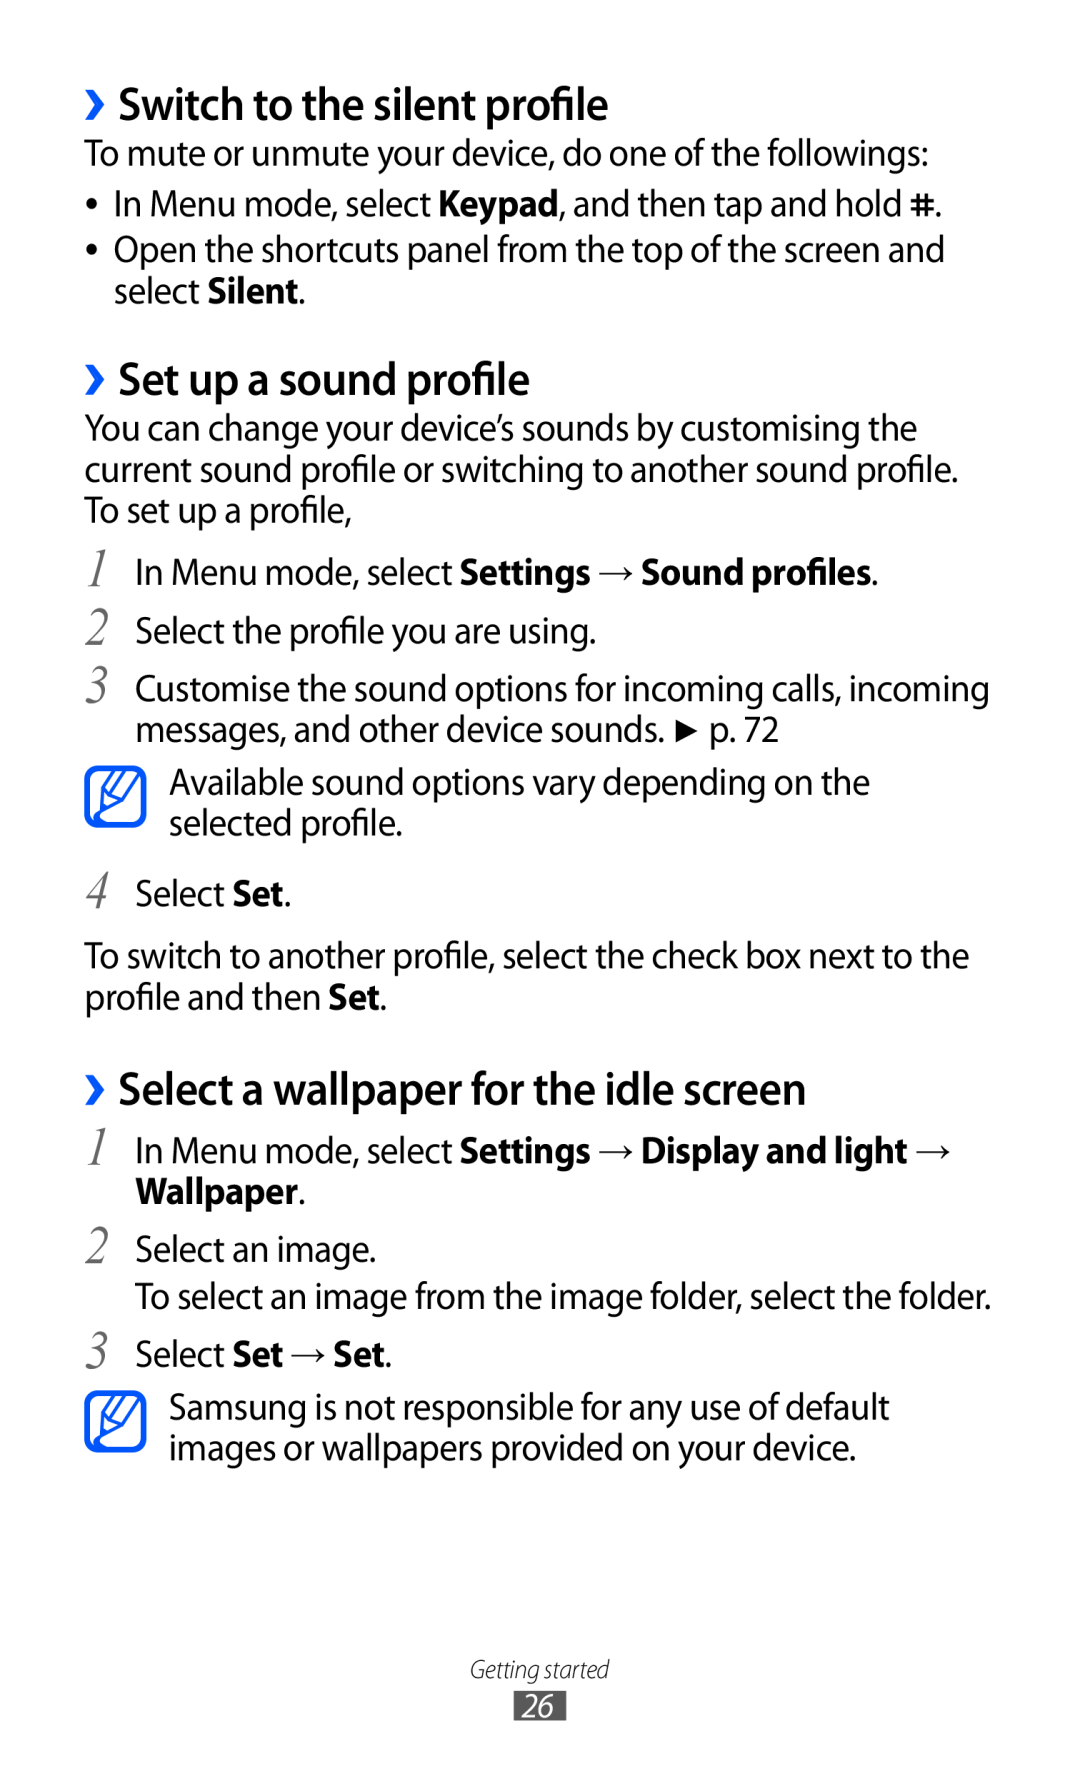 Samsung GT-C6712RWAXEZ ››Switch to the silent profile, ››Set up a sound profile, ››Select a wallpaper for the idle screen 